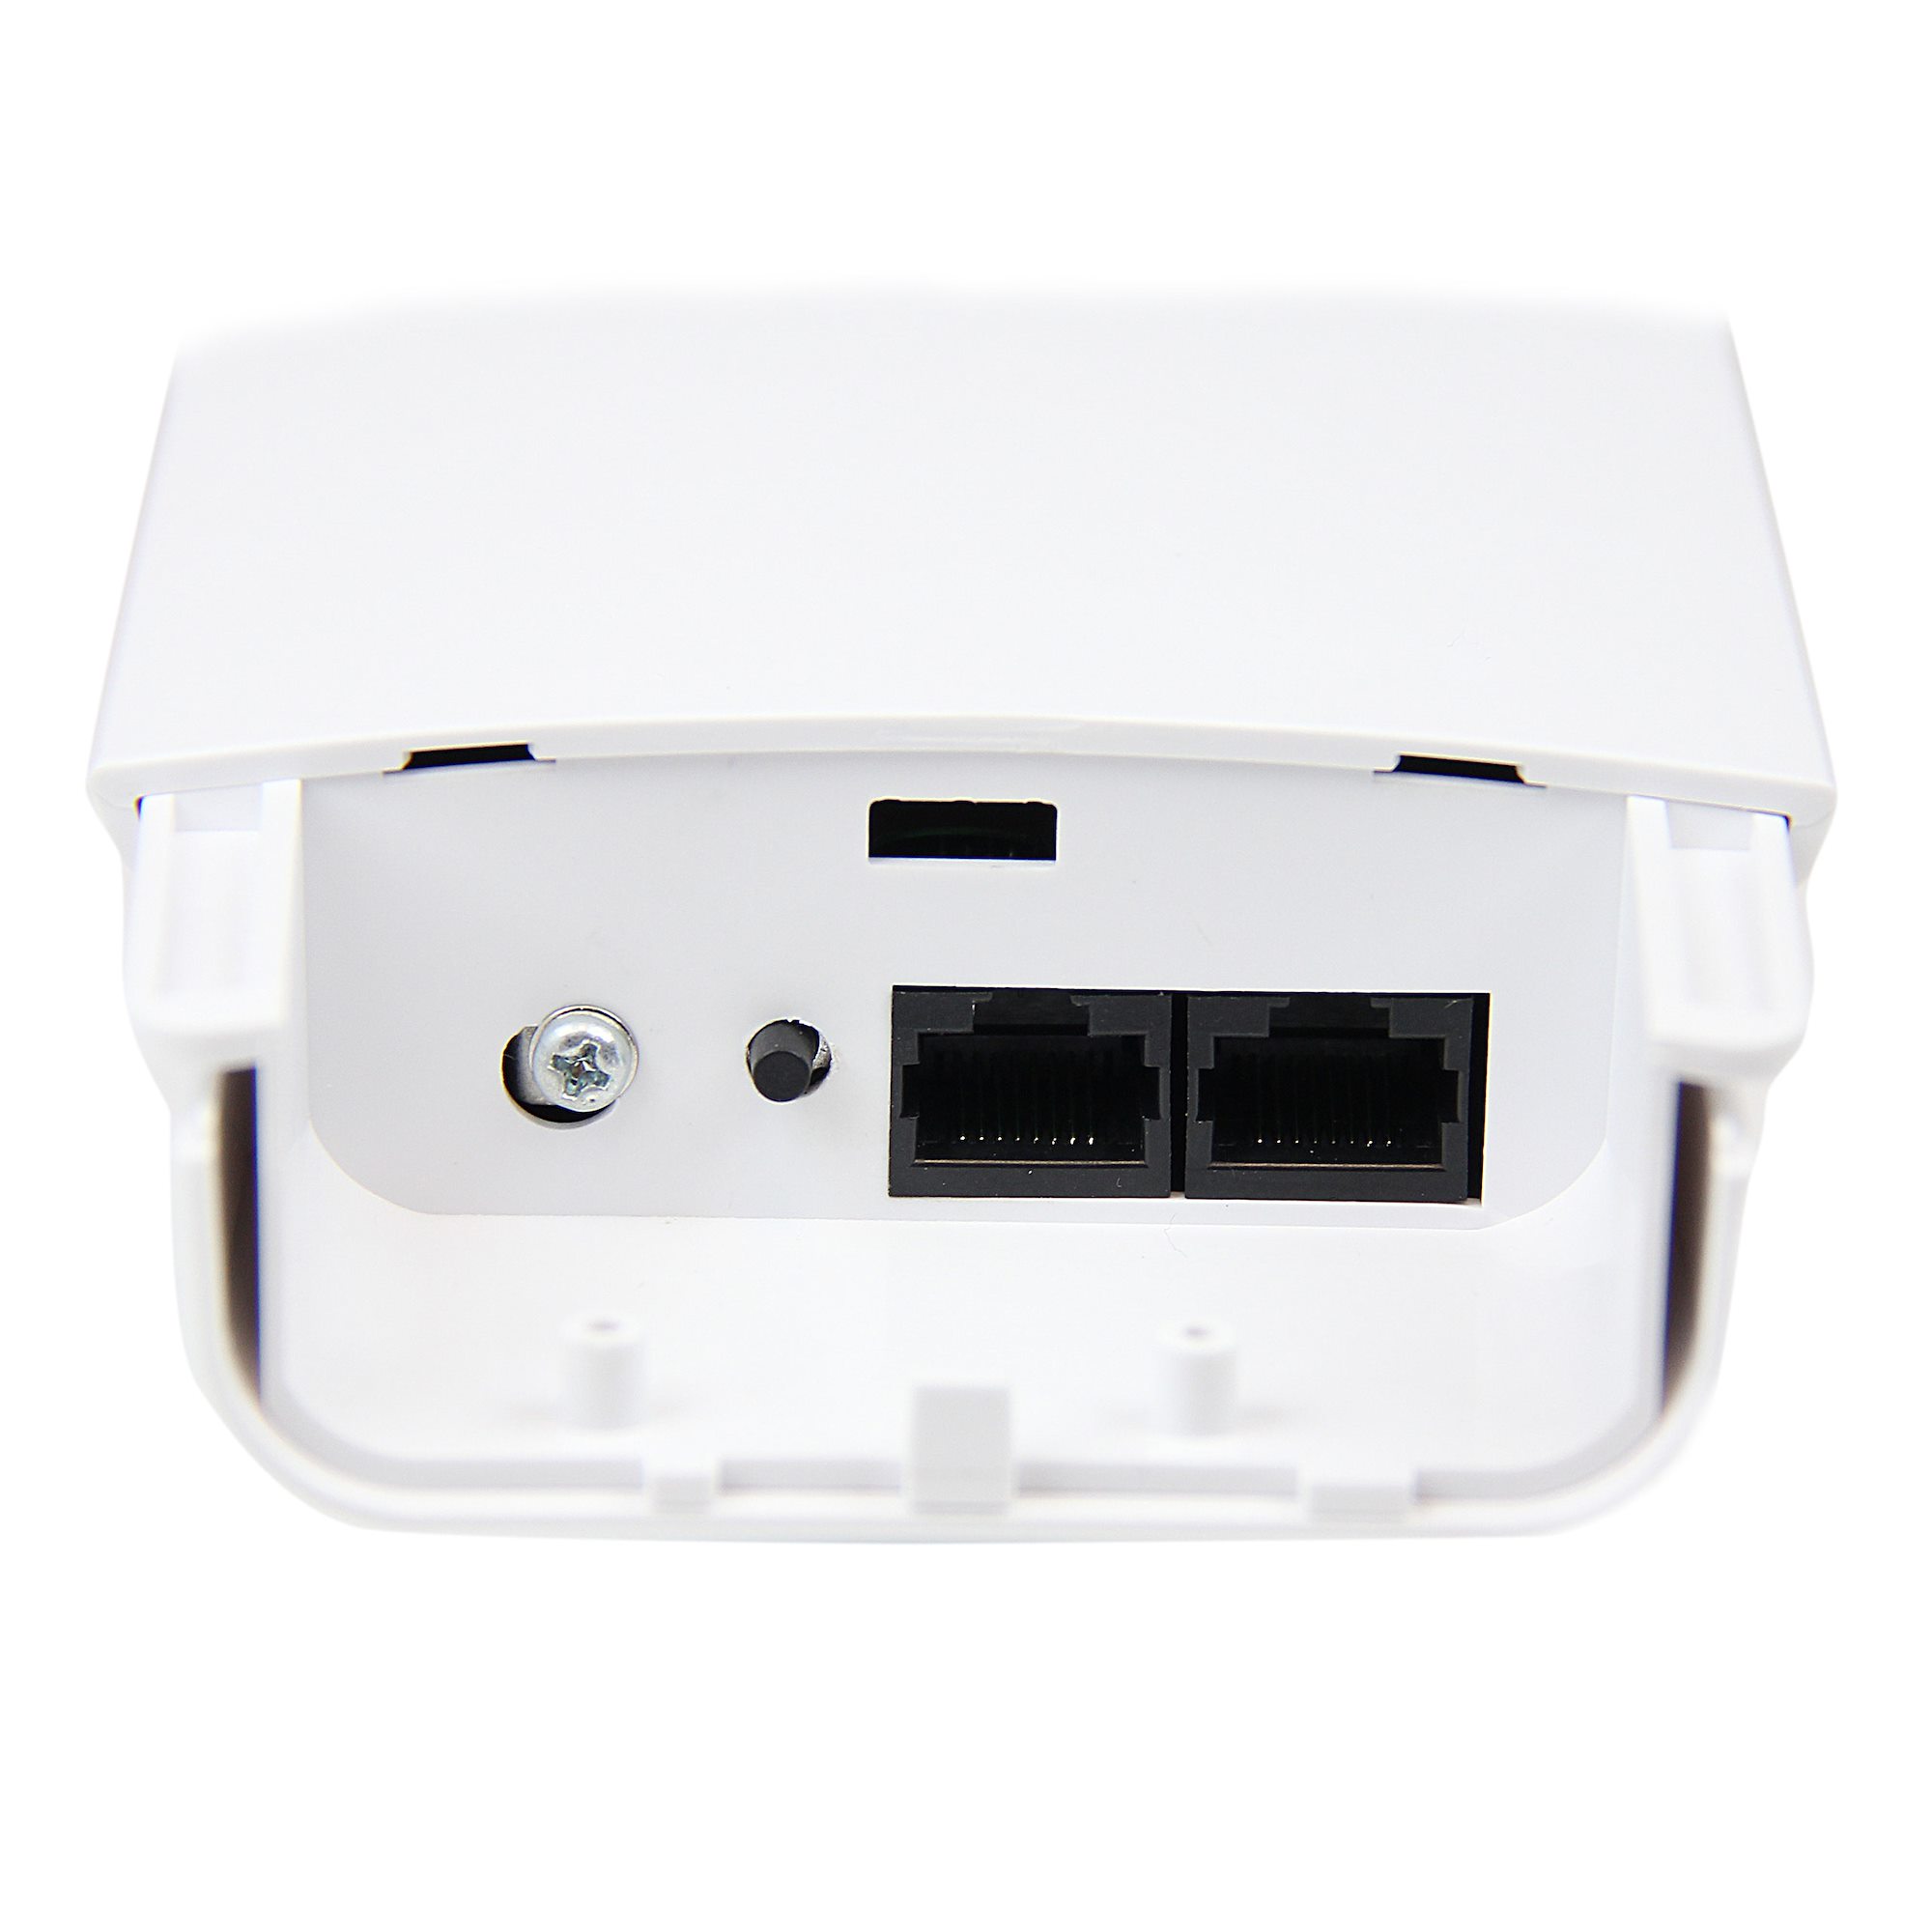 Outdoor 5GHz Wireless-N Access Point - Wireless Network Adapters